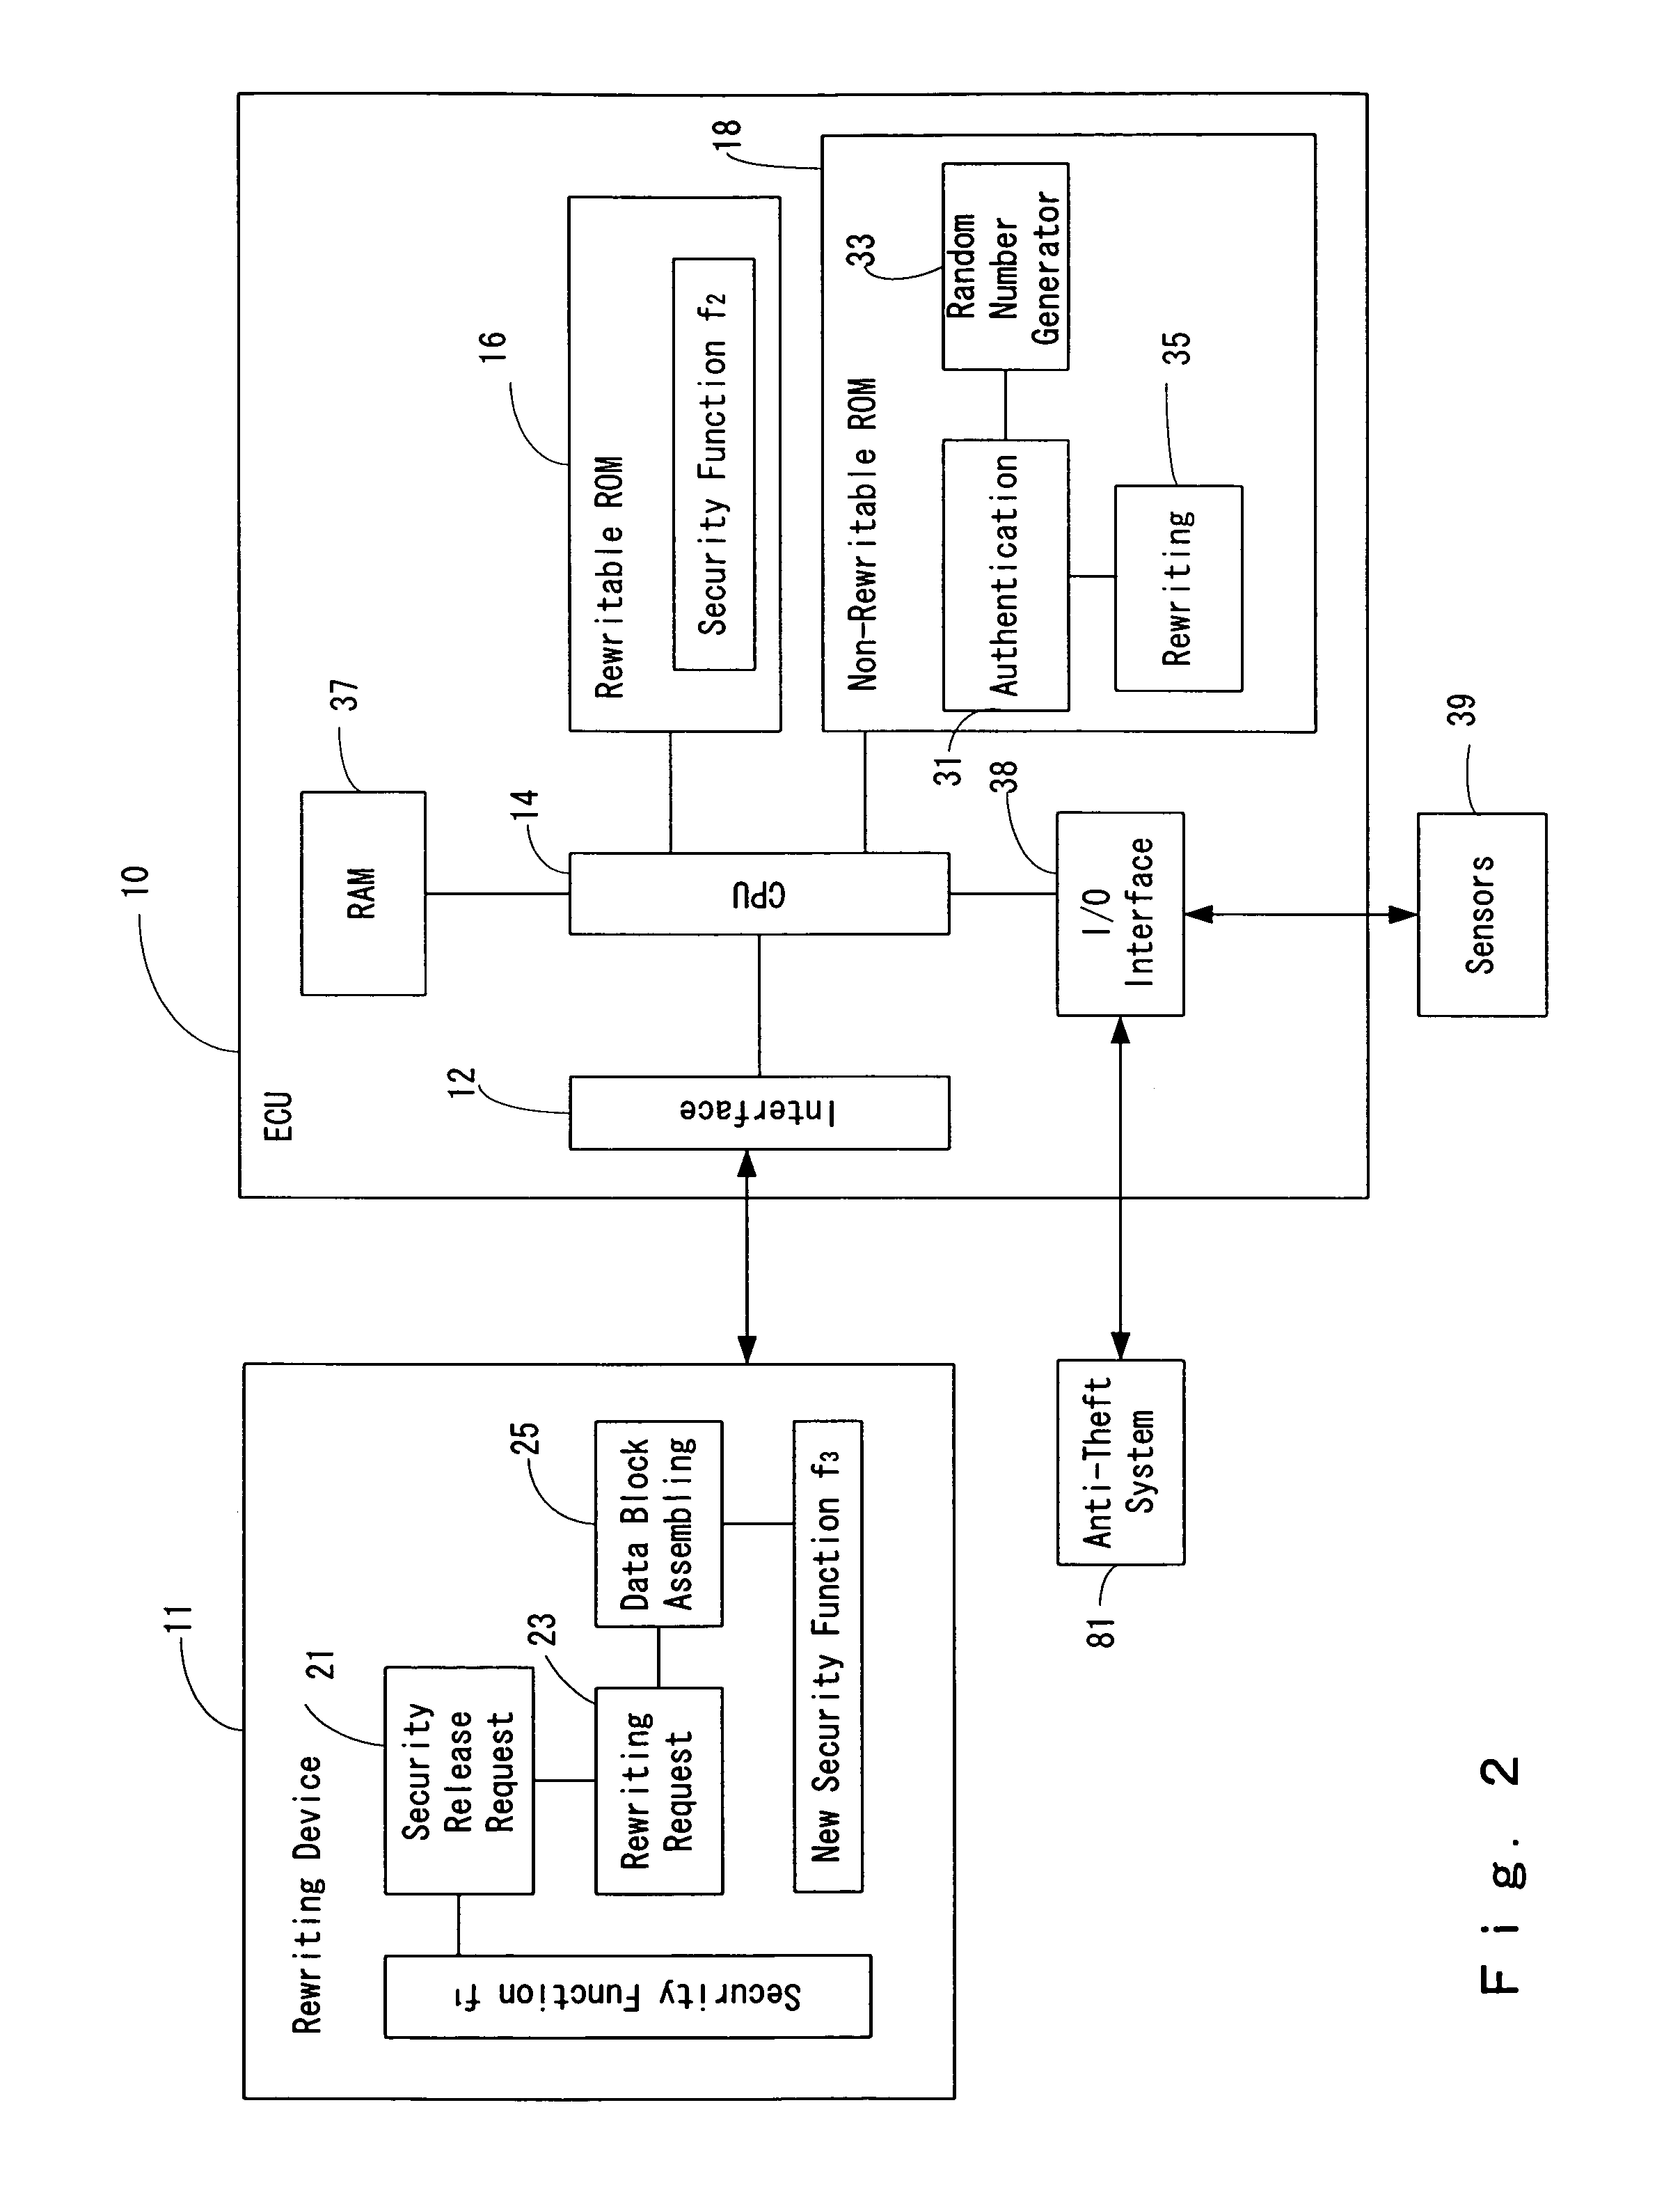 Memory rewriting system for vehicle controller